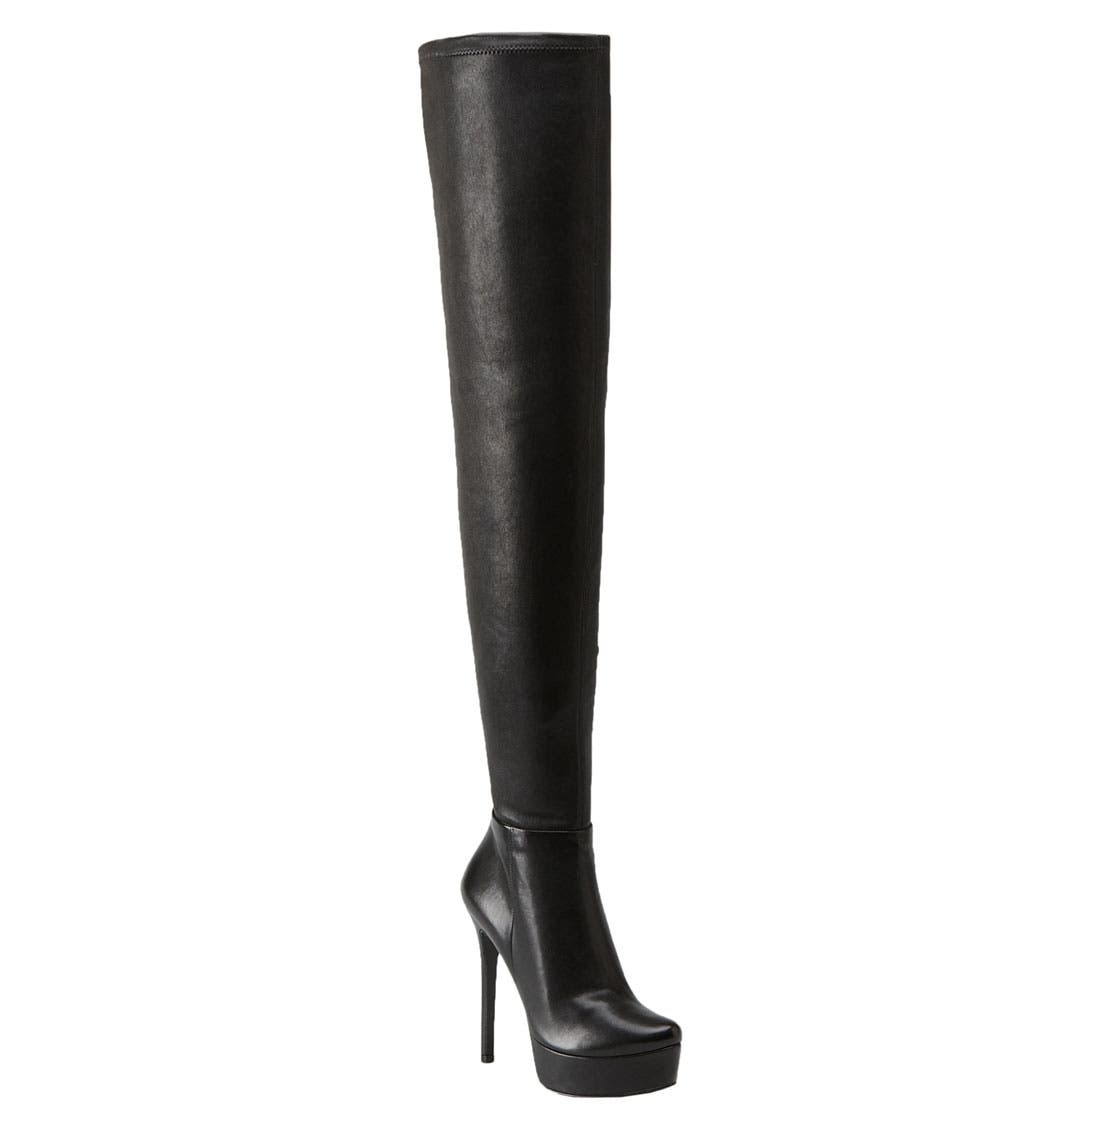 thigh high boots nordstrom